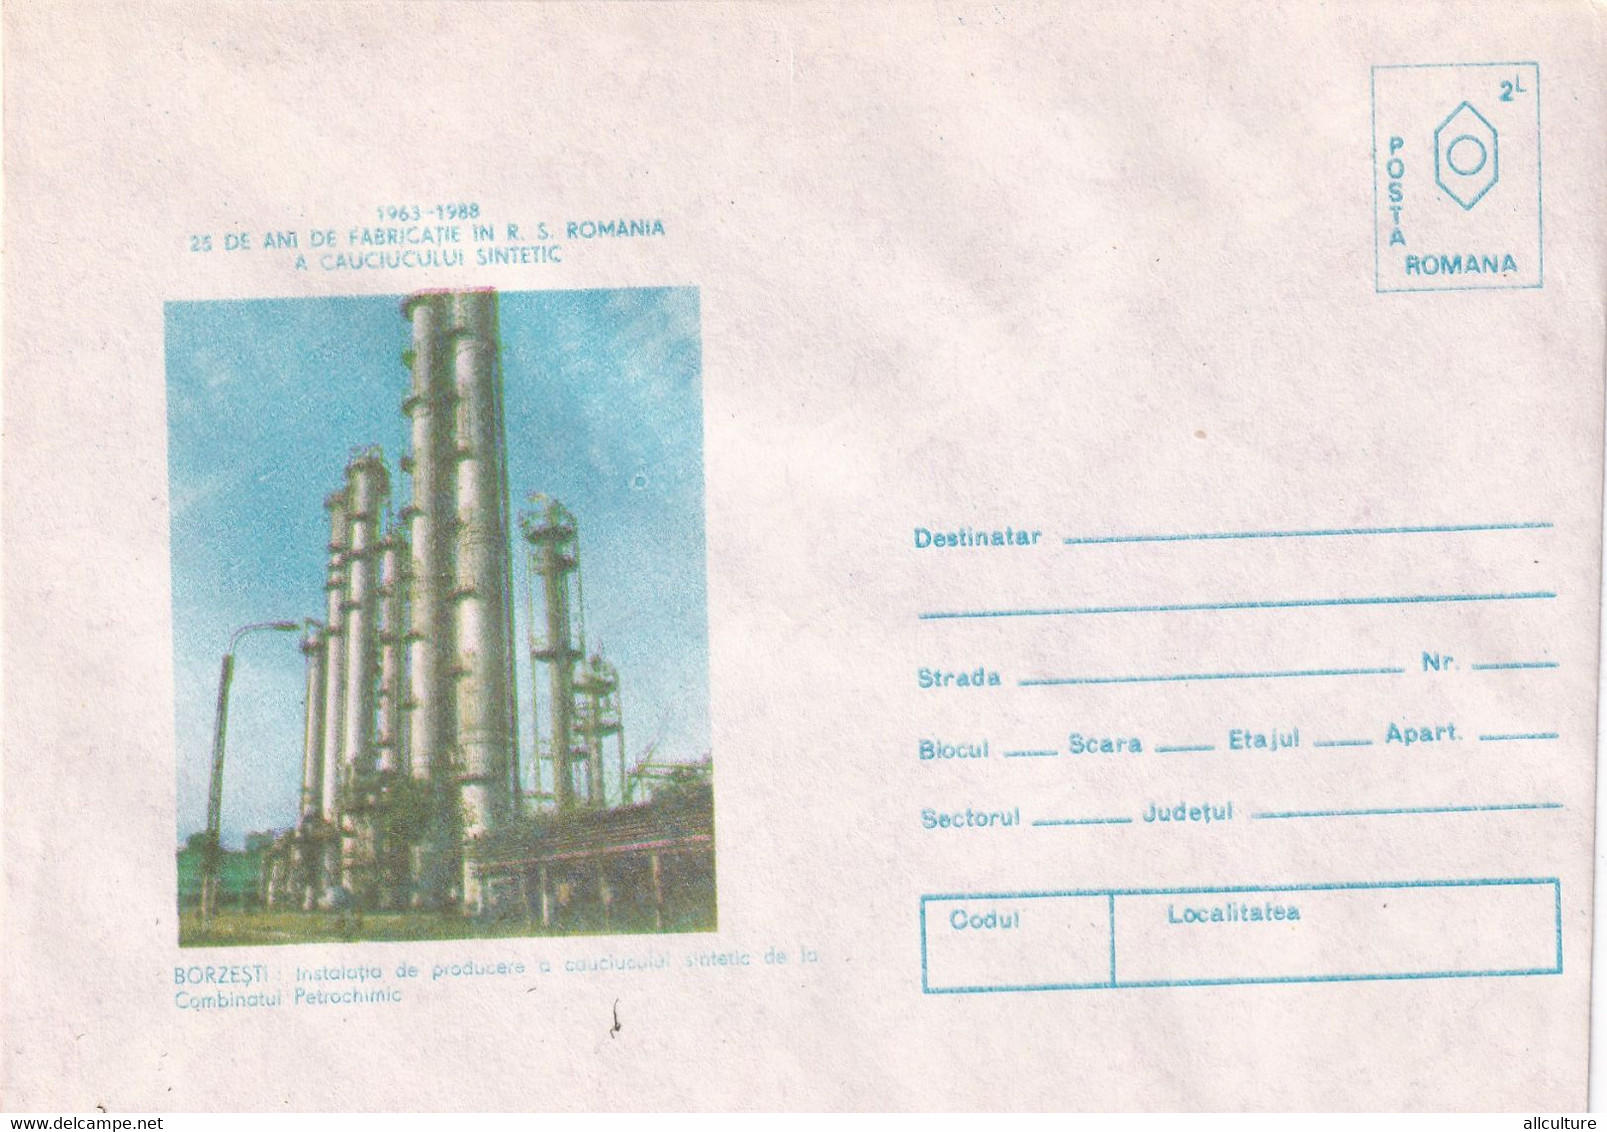 A3118 - 25 Years Of Manufacturing Synthetic Rubber, Petrochemical Plant, Borzesti  Romania Cover Stationery - Factories & Industries